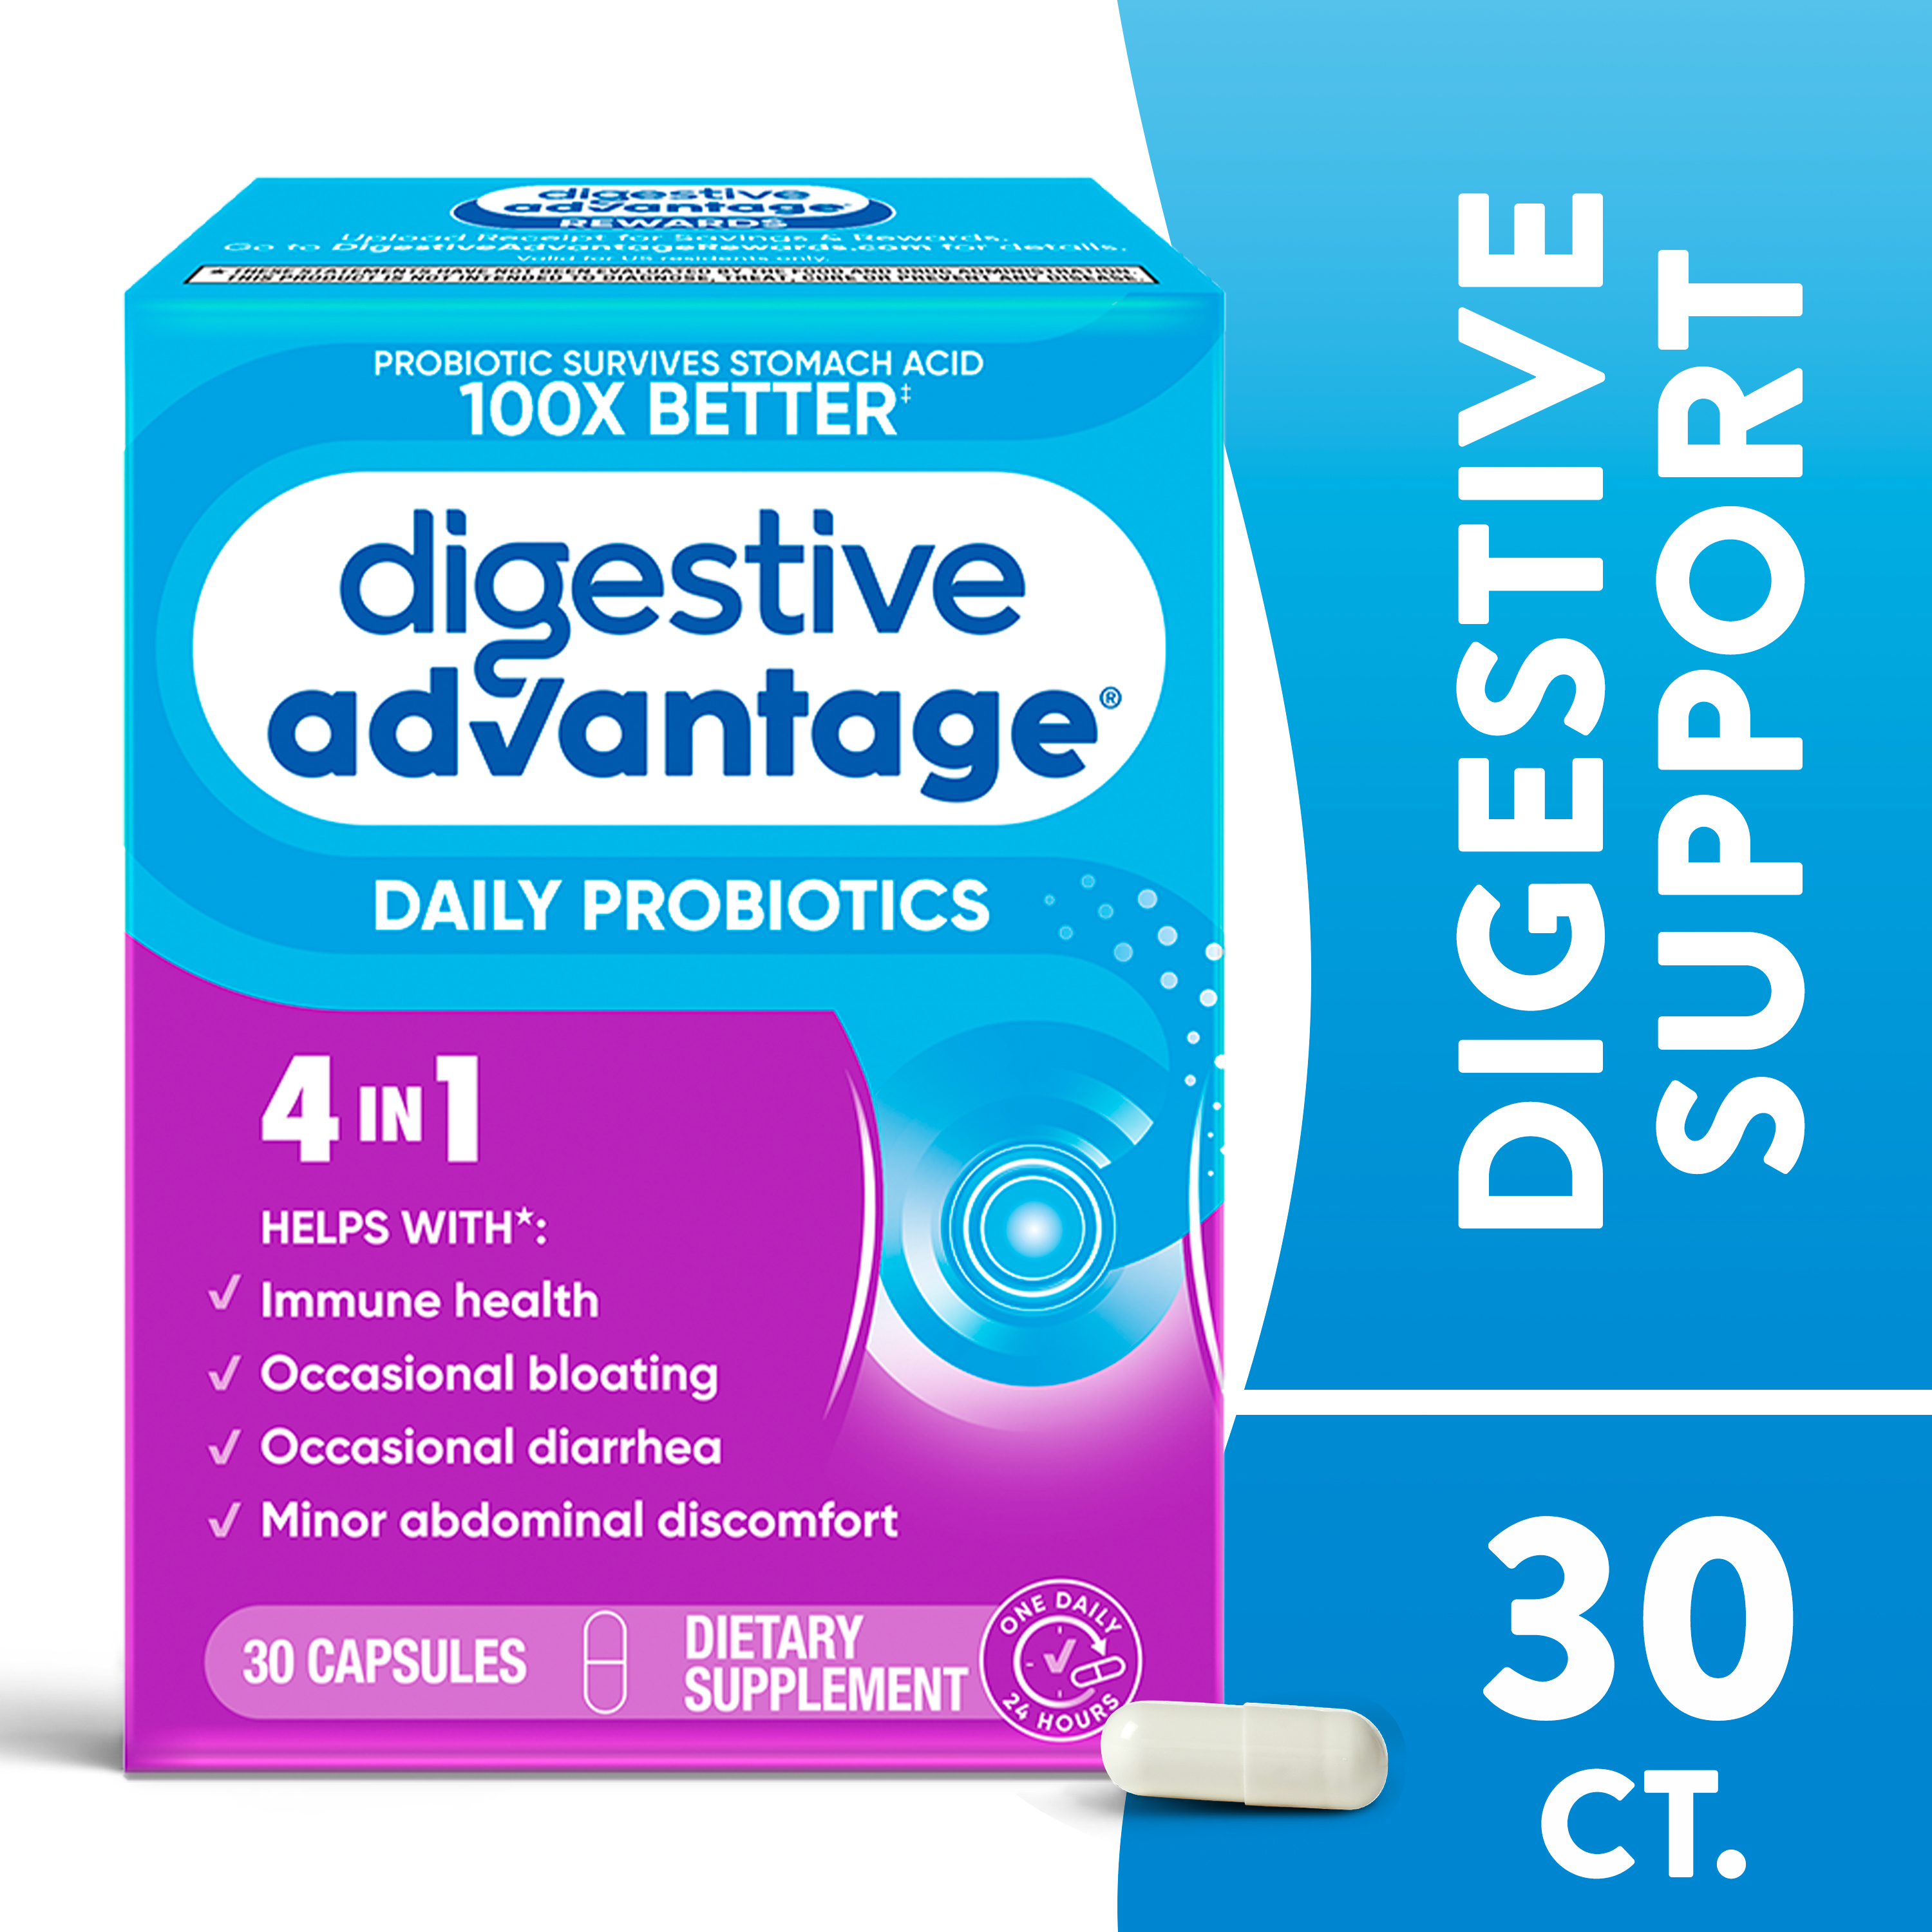 Digestive Advantage Daily Probiotic, Survives Better than 50 Billion - 30 Capsules - image 1 of 8